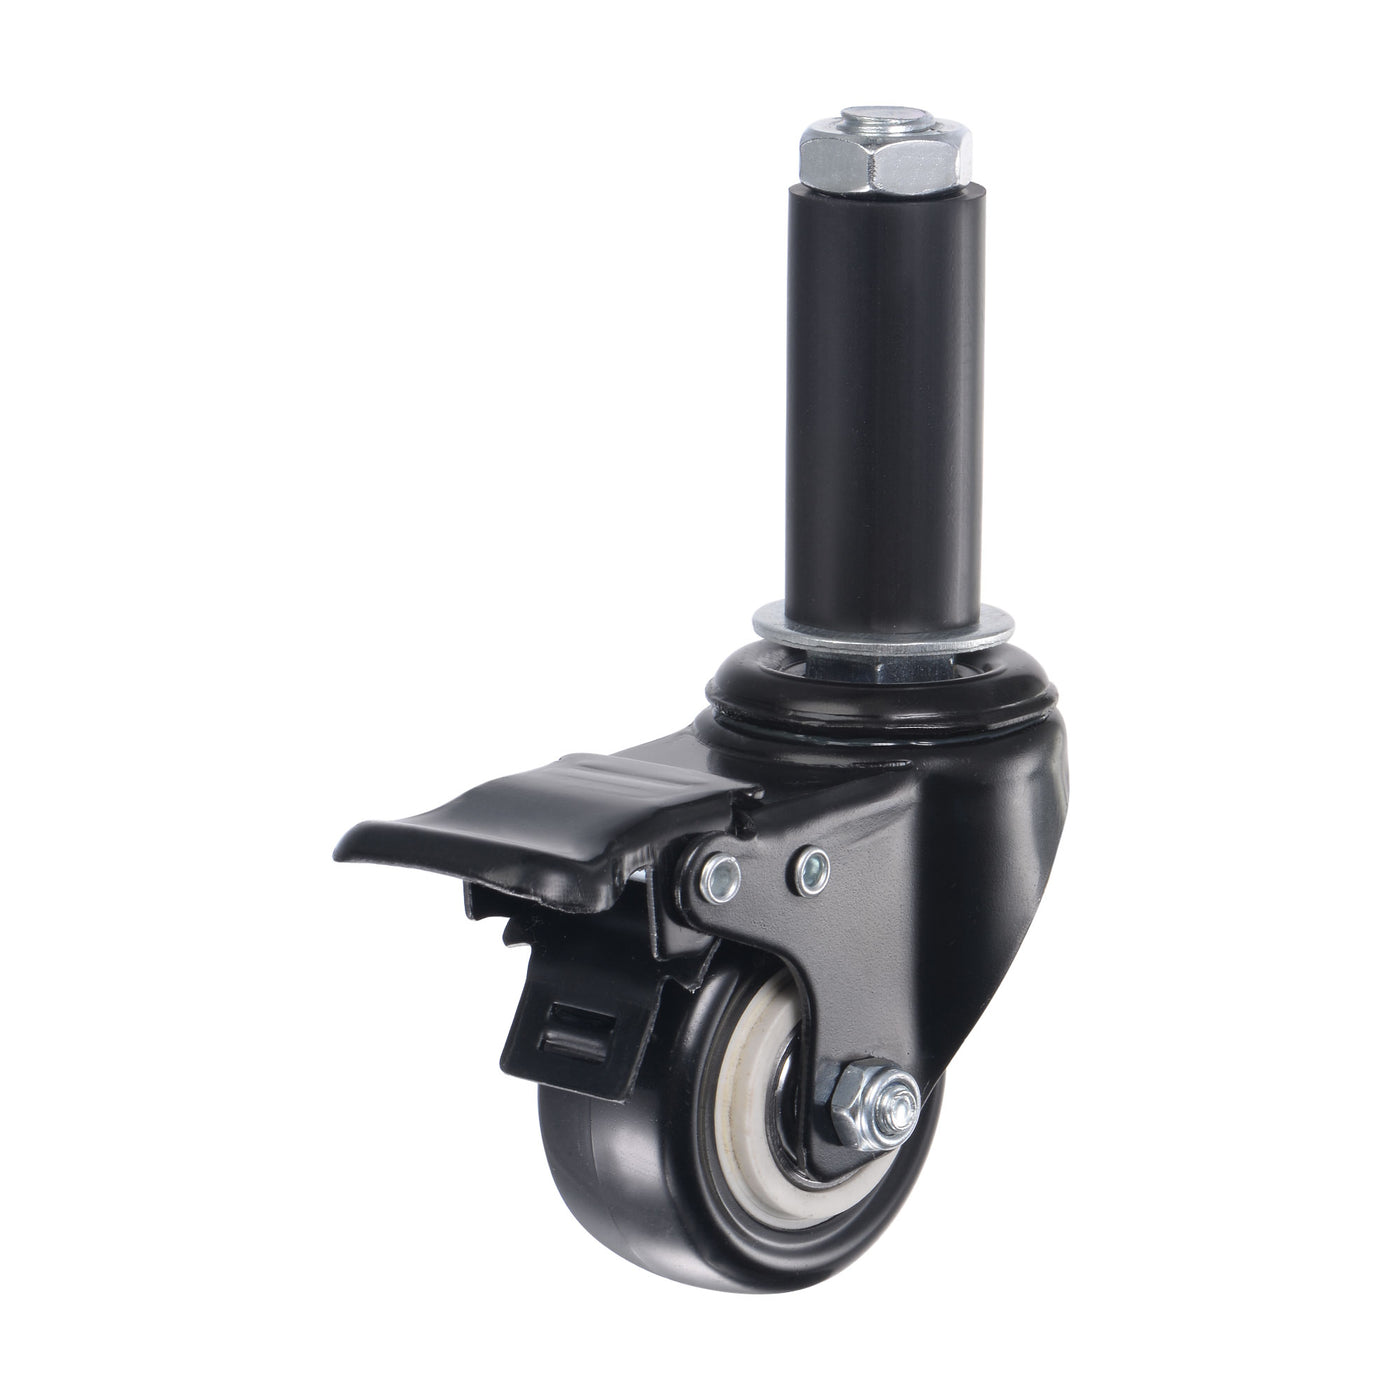 uxcell Uxcell Swivel Expanding Stem Caster with Brake Diameter Load Capacity, for Kitchen Prep Tables, PVC